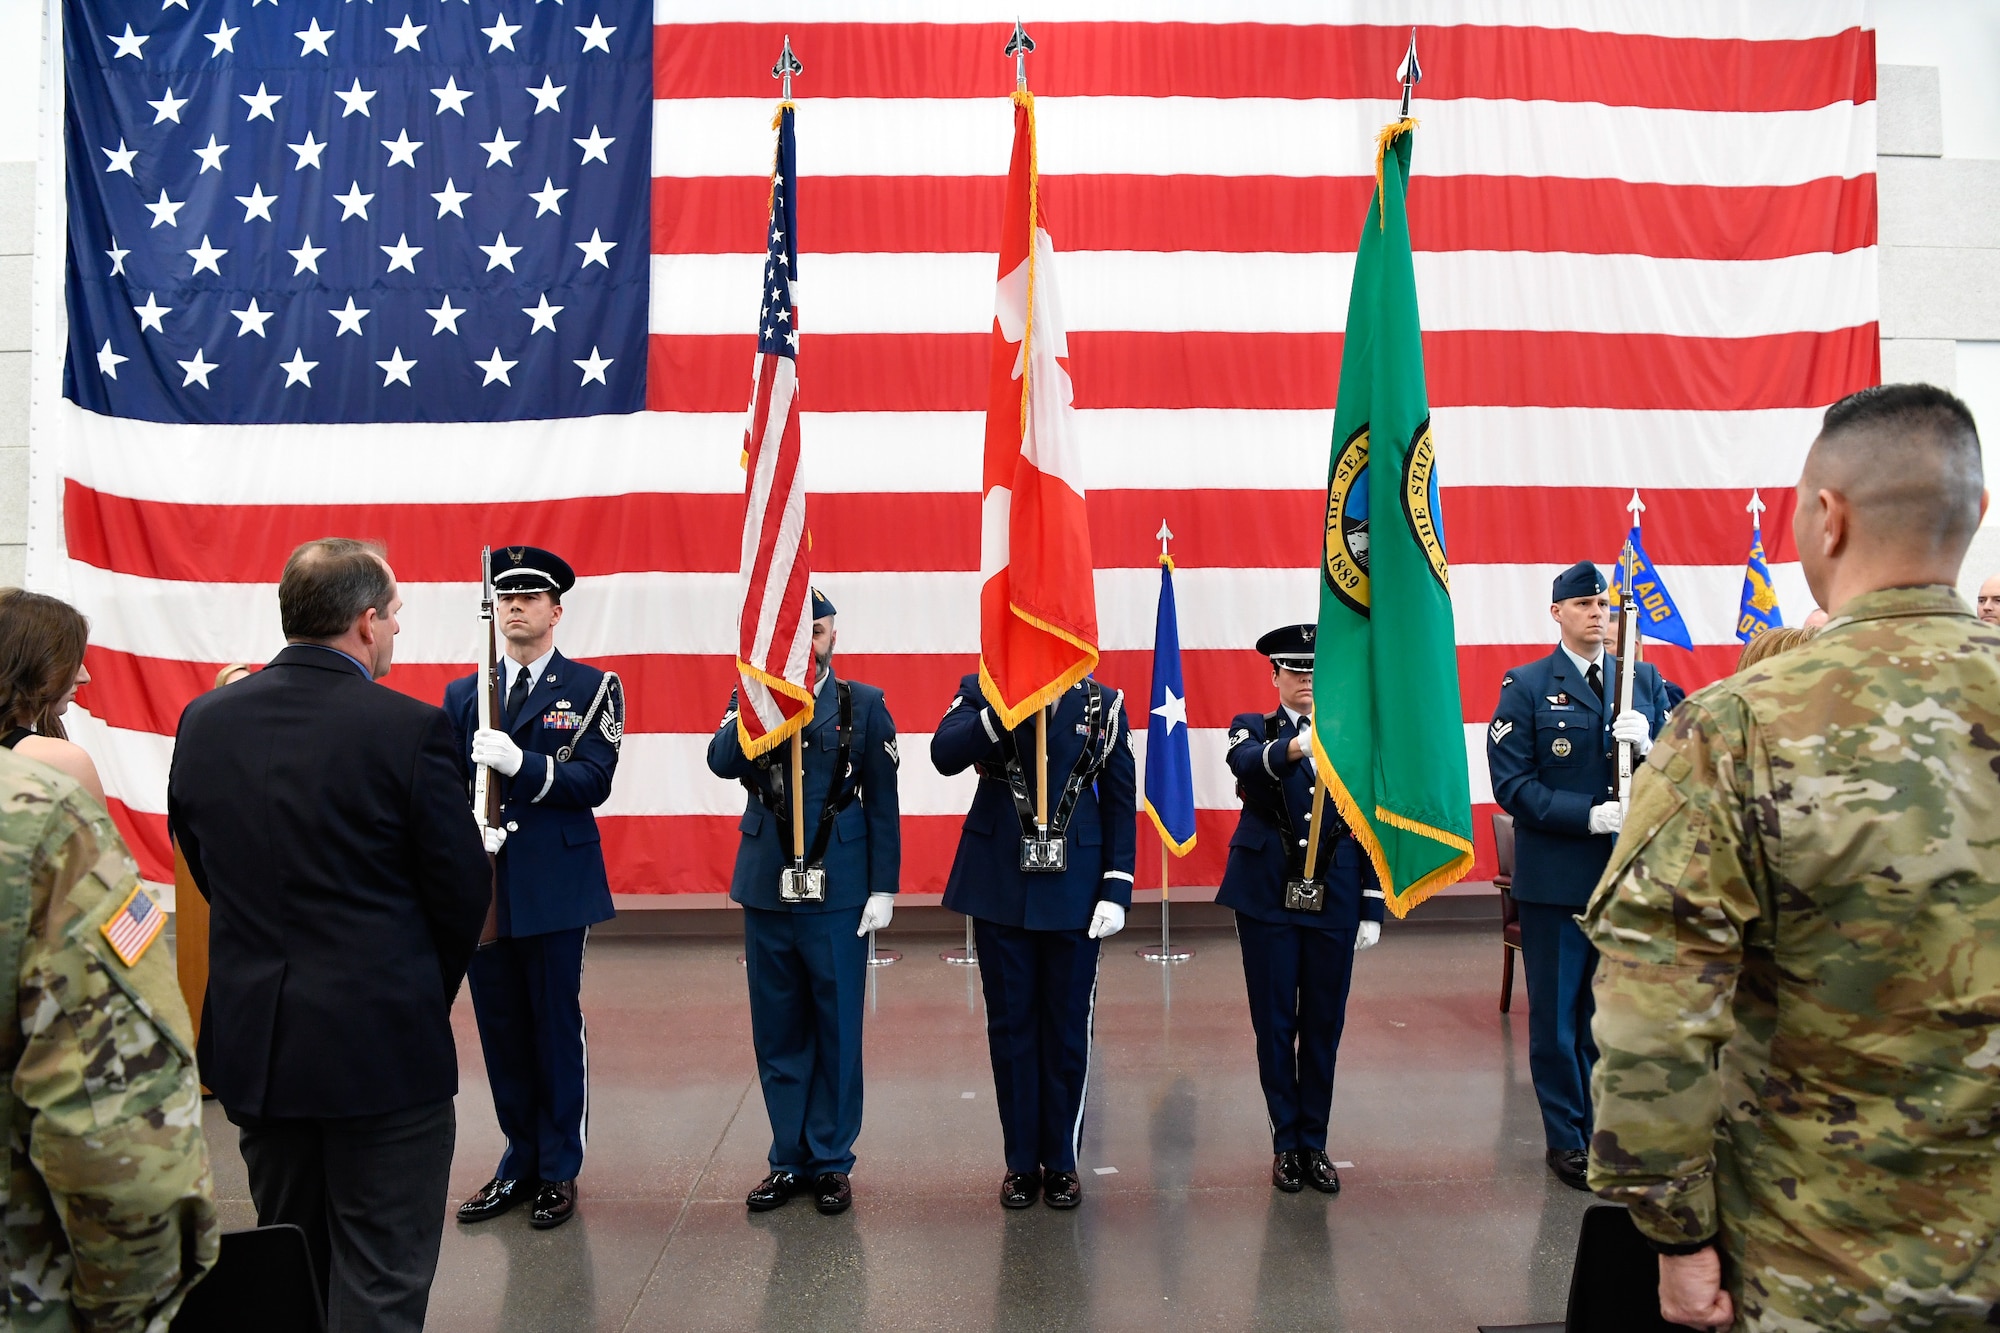 Members of the Western Air Defense Sector Honor Guard post the colors during the 225th Air Defense Group assumption of command ceremony at the Pierce County Readiness Center, Camp Murray, Washington, April 10, 2019. (U.S. Air National Guard photo by Capt. Colette Muller)